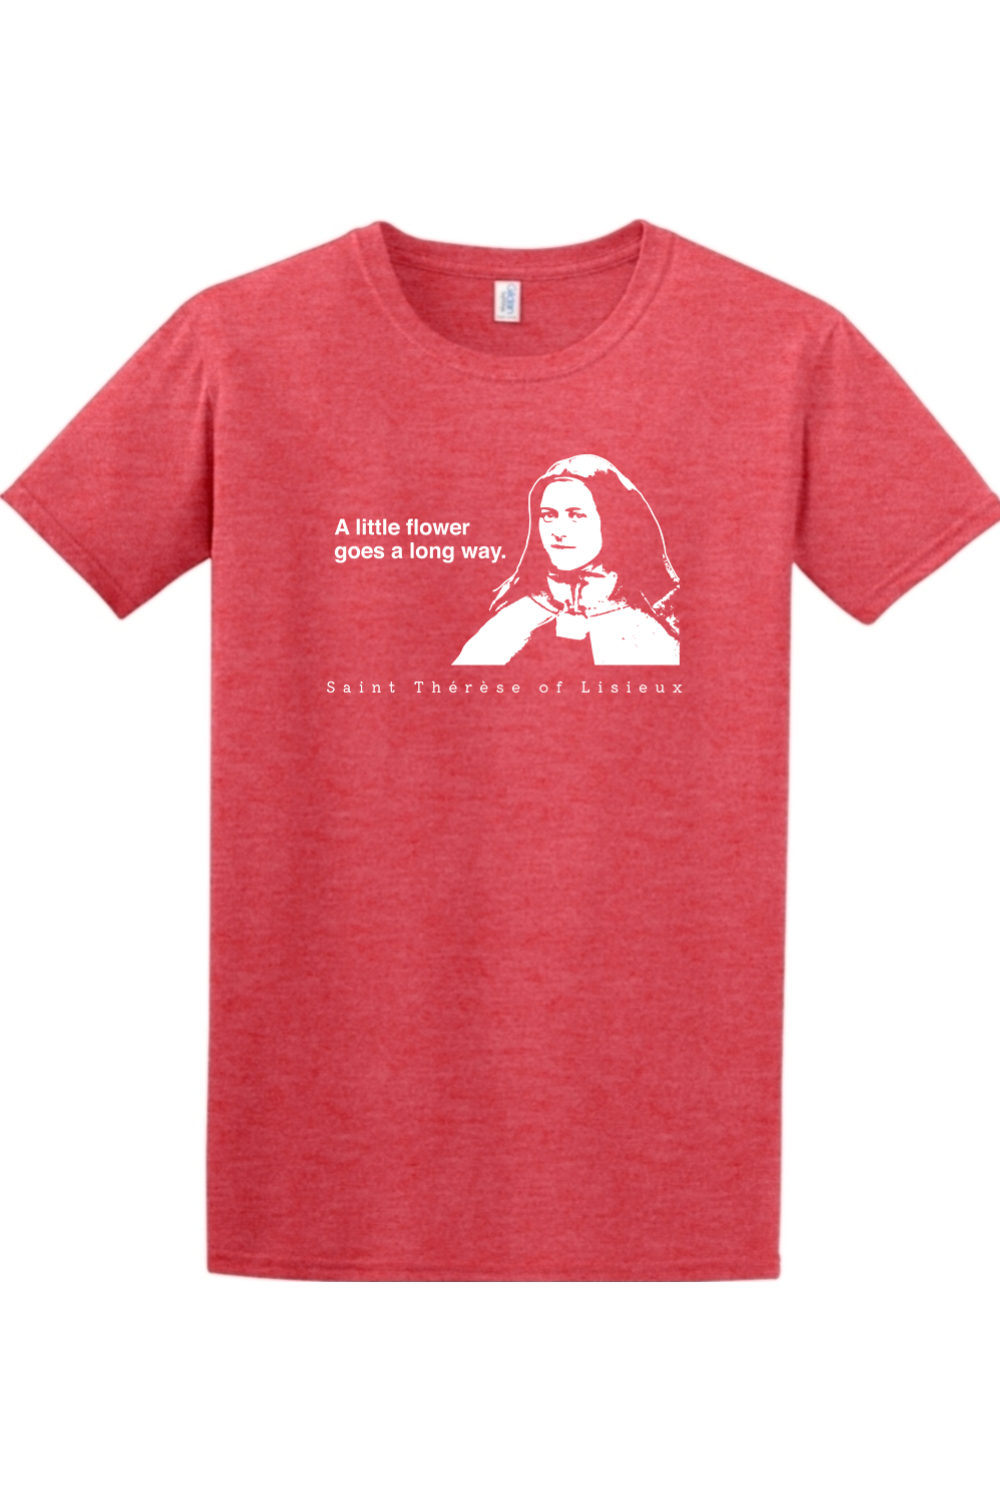 A Little Flower Goes a Long Way - St. Thérèse of Lisieux Adult T-shirt